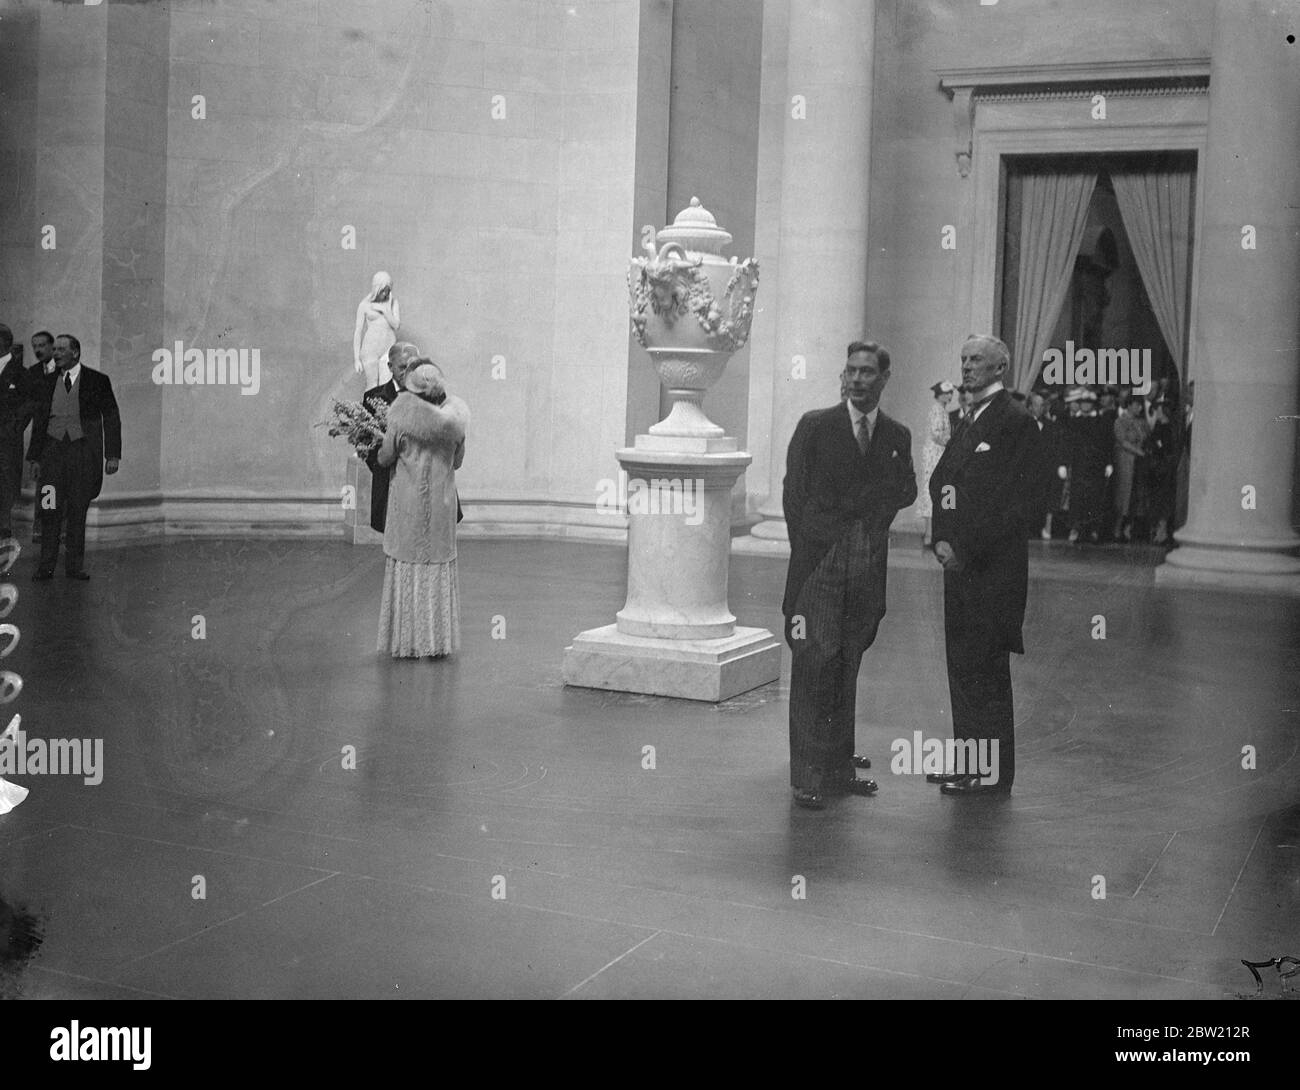 The new Tate Gallery which the King and Queen opened today (Tuesday). The sculpture gallery which was presented by Lord Duveen, gives an architectural vista nearly 500 feet long and is the greatest hall of sculpture in the world. The King a accompanied by Sir Evan Charteris, Chairman of the Tate Gallery viewing the sculpture. 29 June 1937 Stock Photo